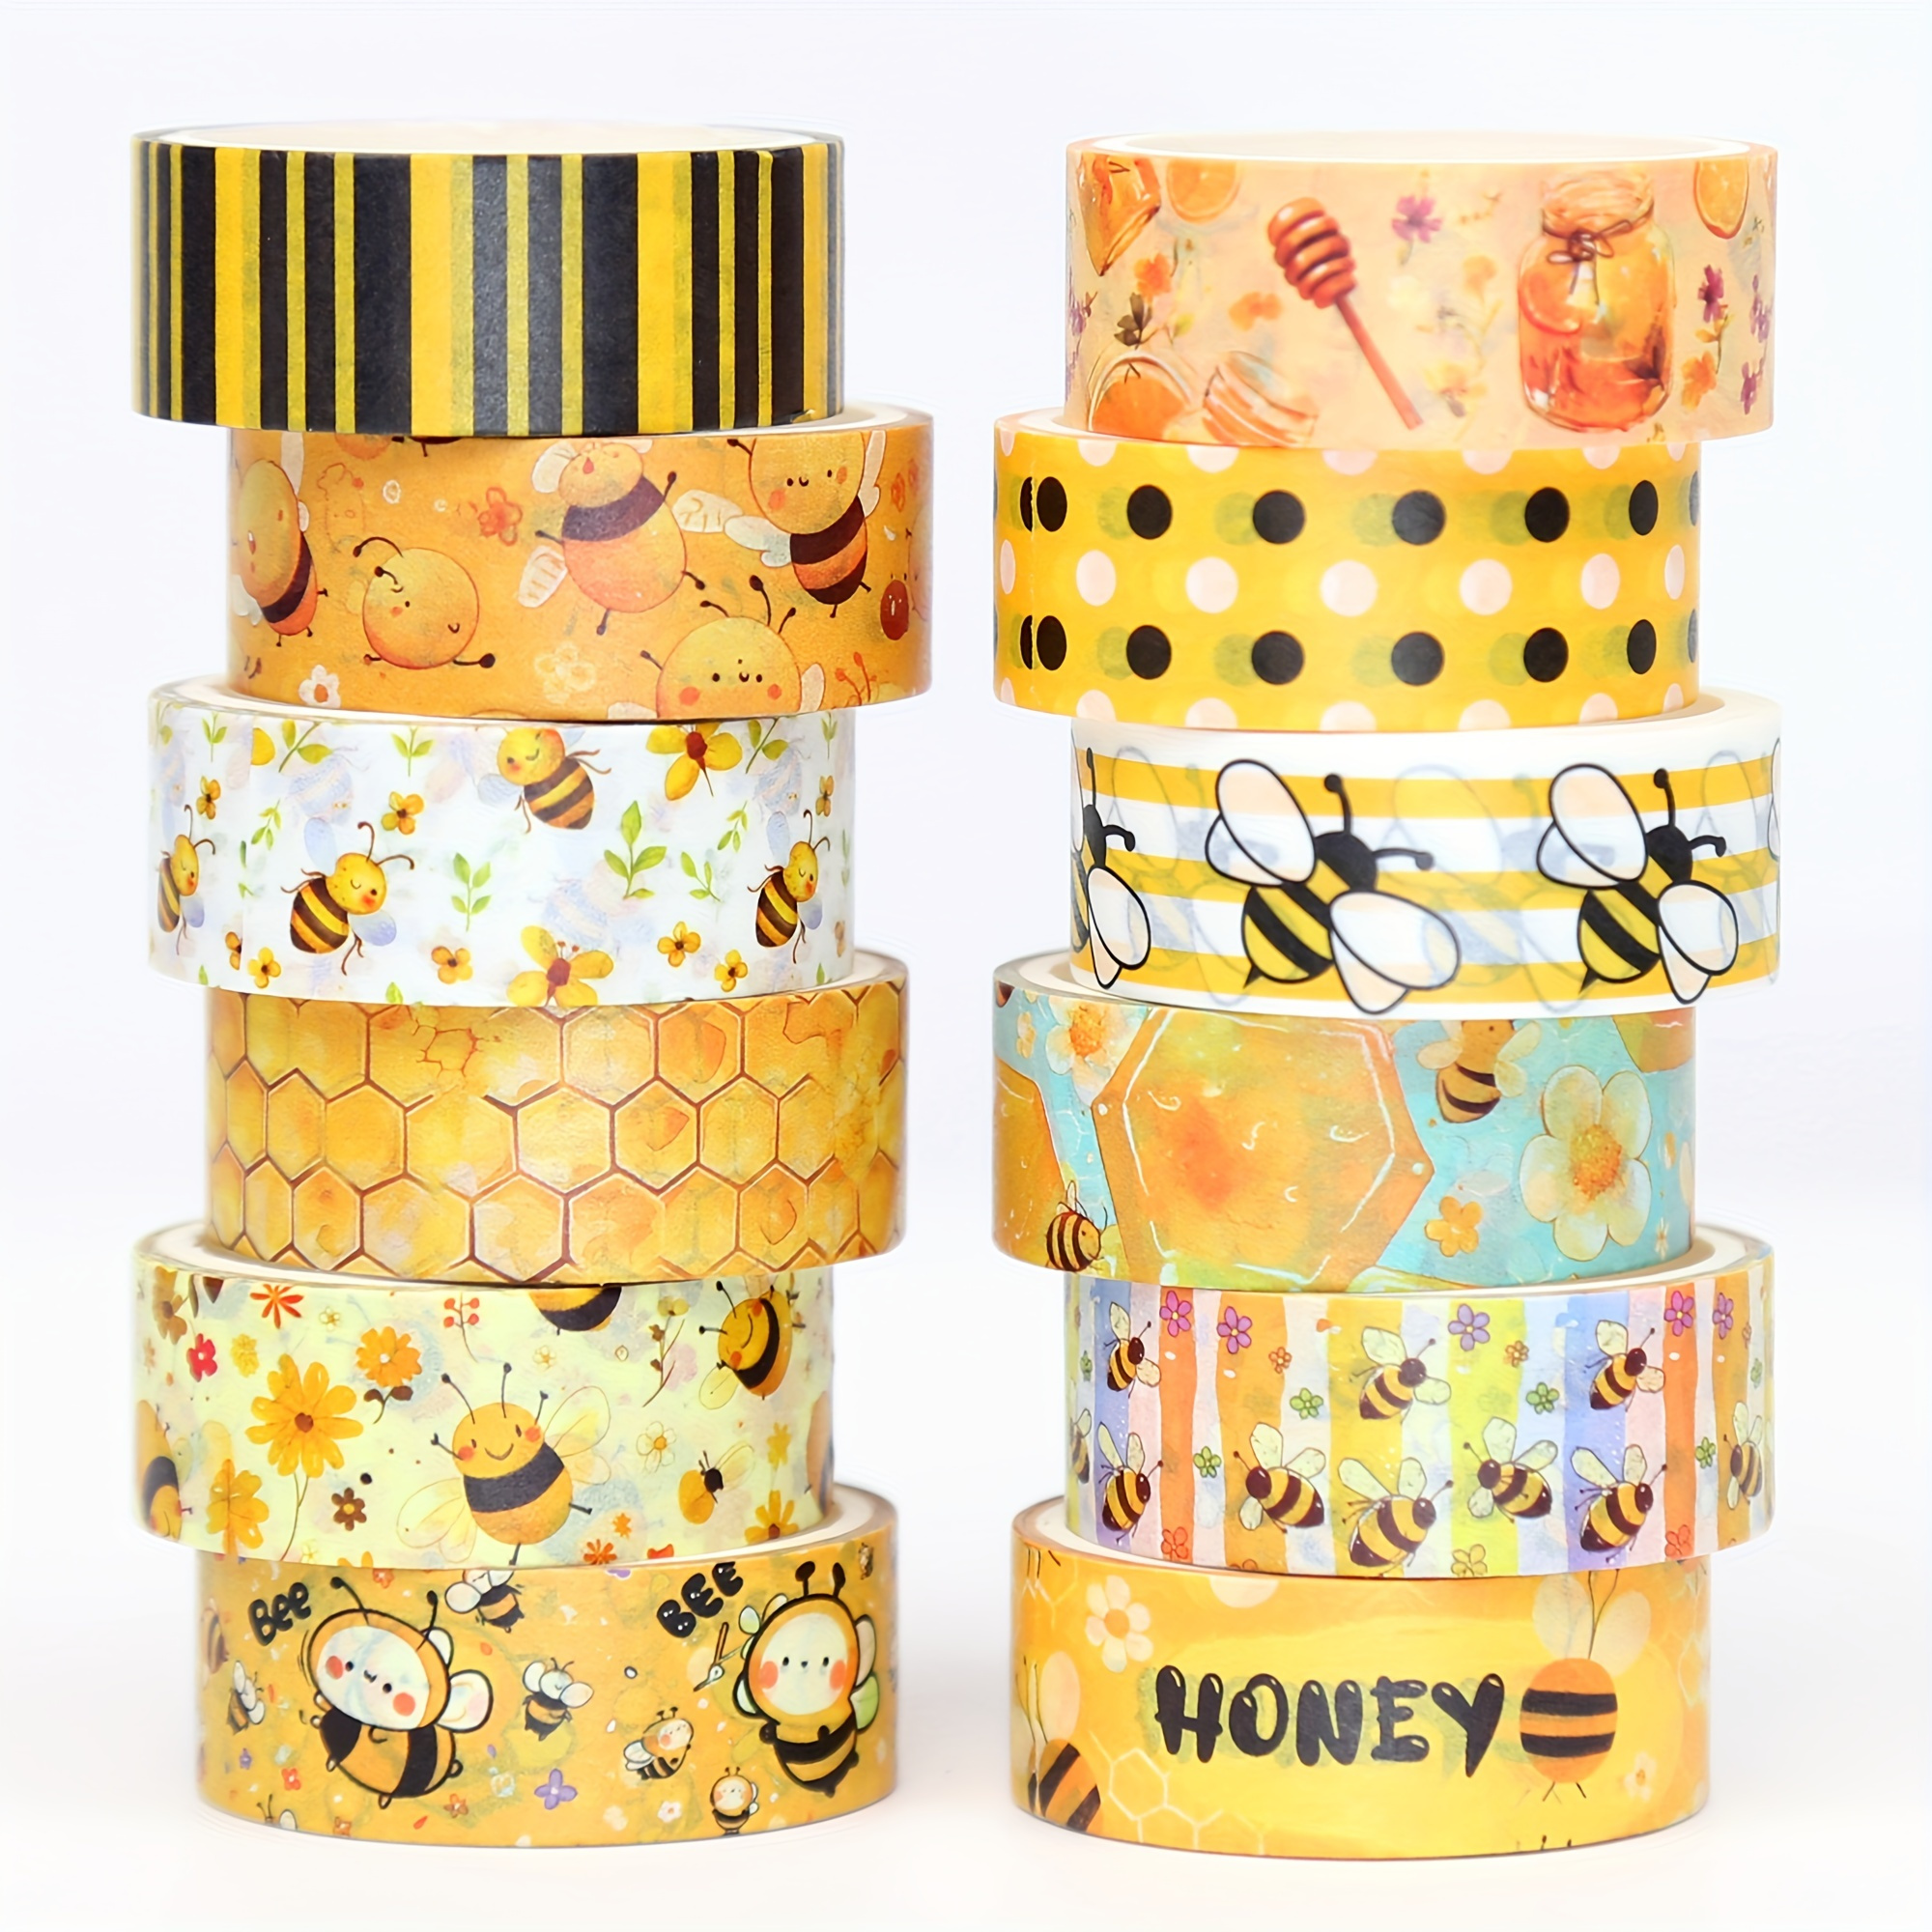 

Nikomie 12-roll Bee Washi Tape Set, Decorative Yellow Honey Theme Paper Tape For Scrapbooking, Journaling, Diy Crafts, And Gift Wrapping, Non-waterproof Crafting Tape With Bee And Honeycomb Designs